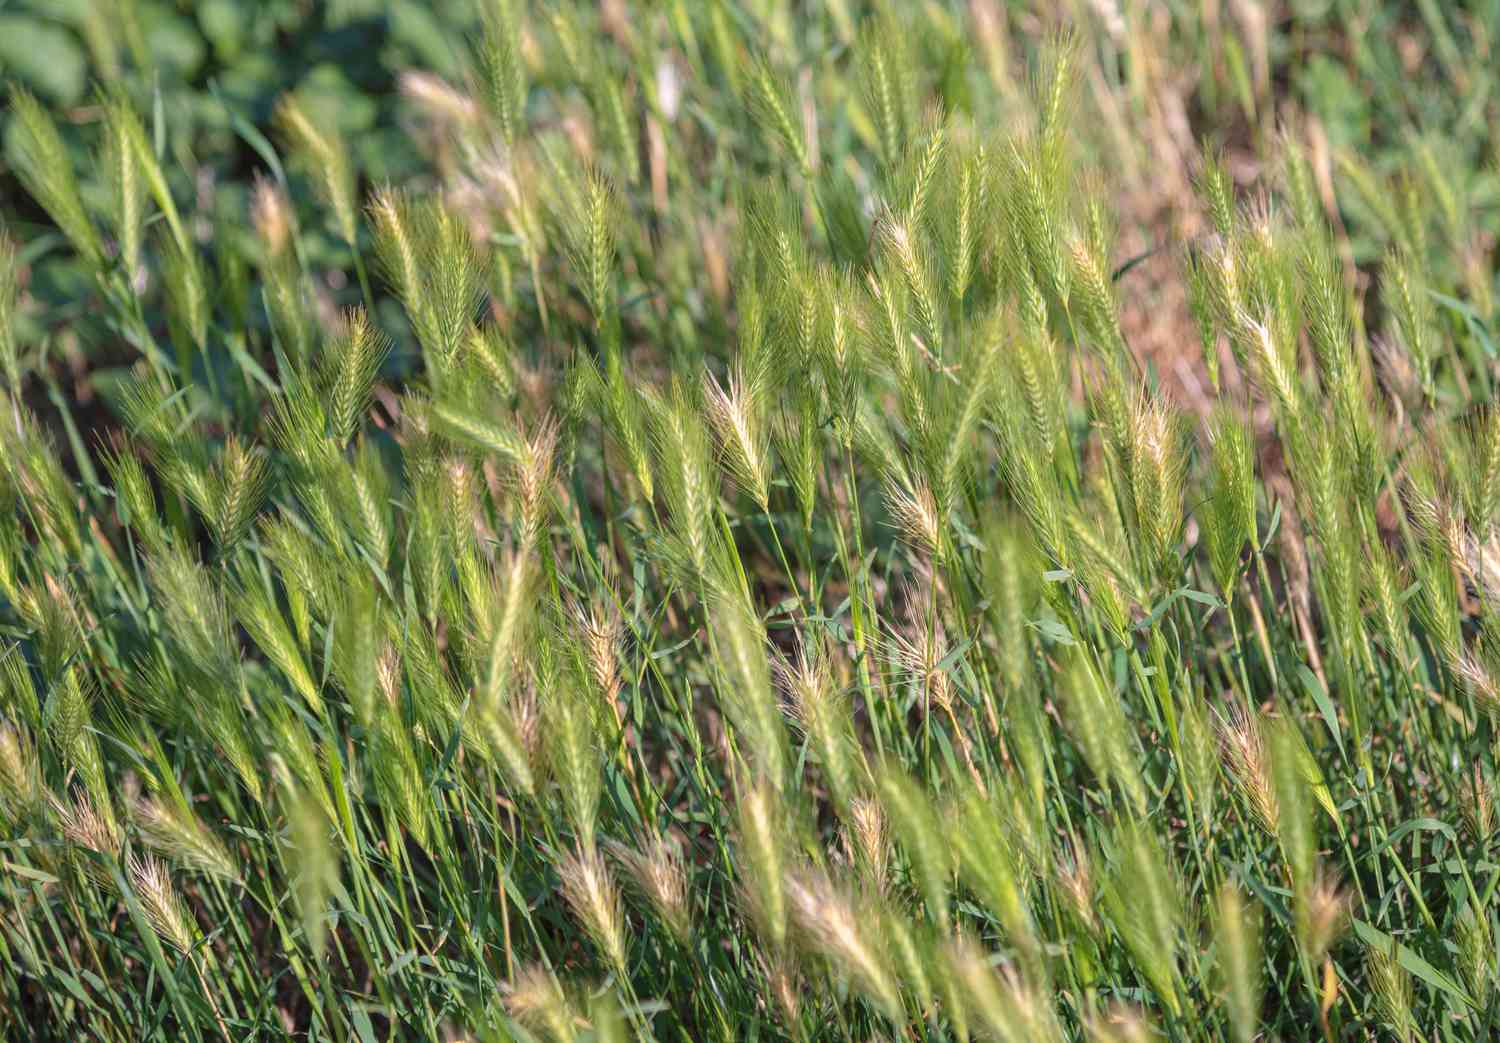 Canada wil rye ornamental with clump-forming grass on thin stems